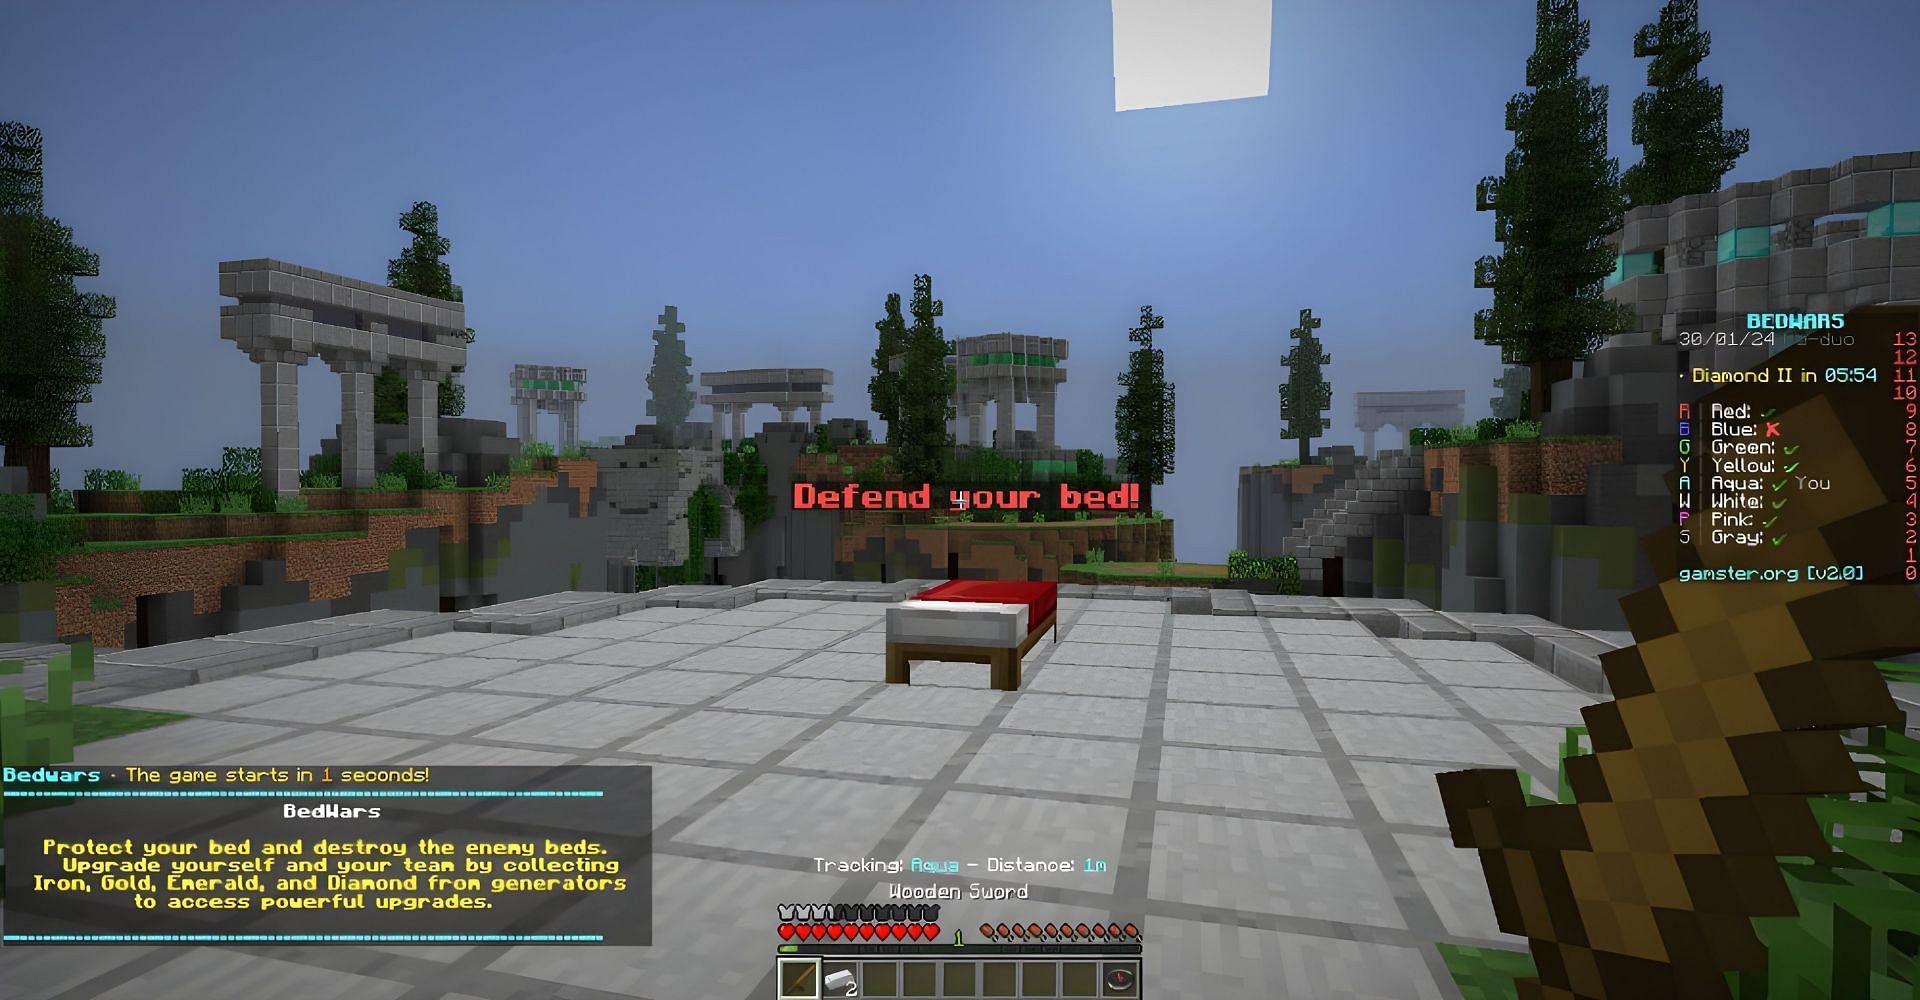 Gamster is an amazing option for players who love minigames (Image via Mojang)